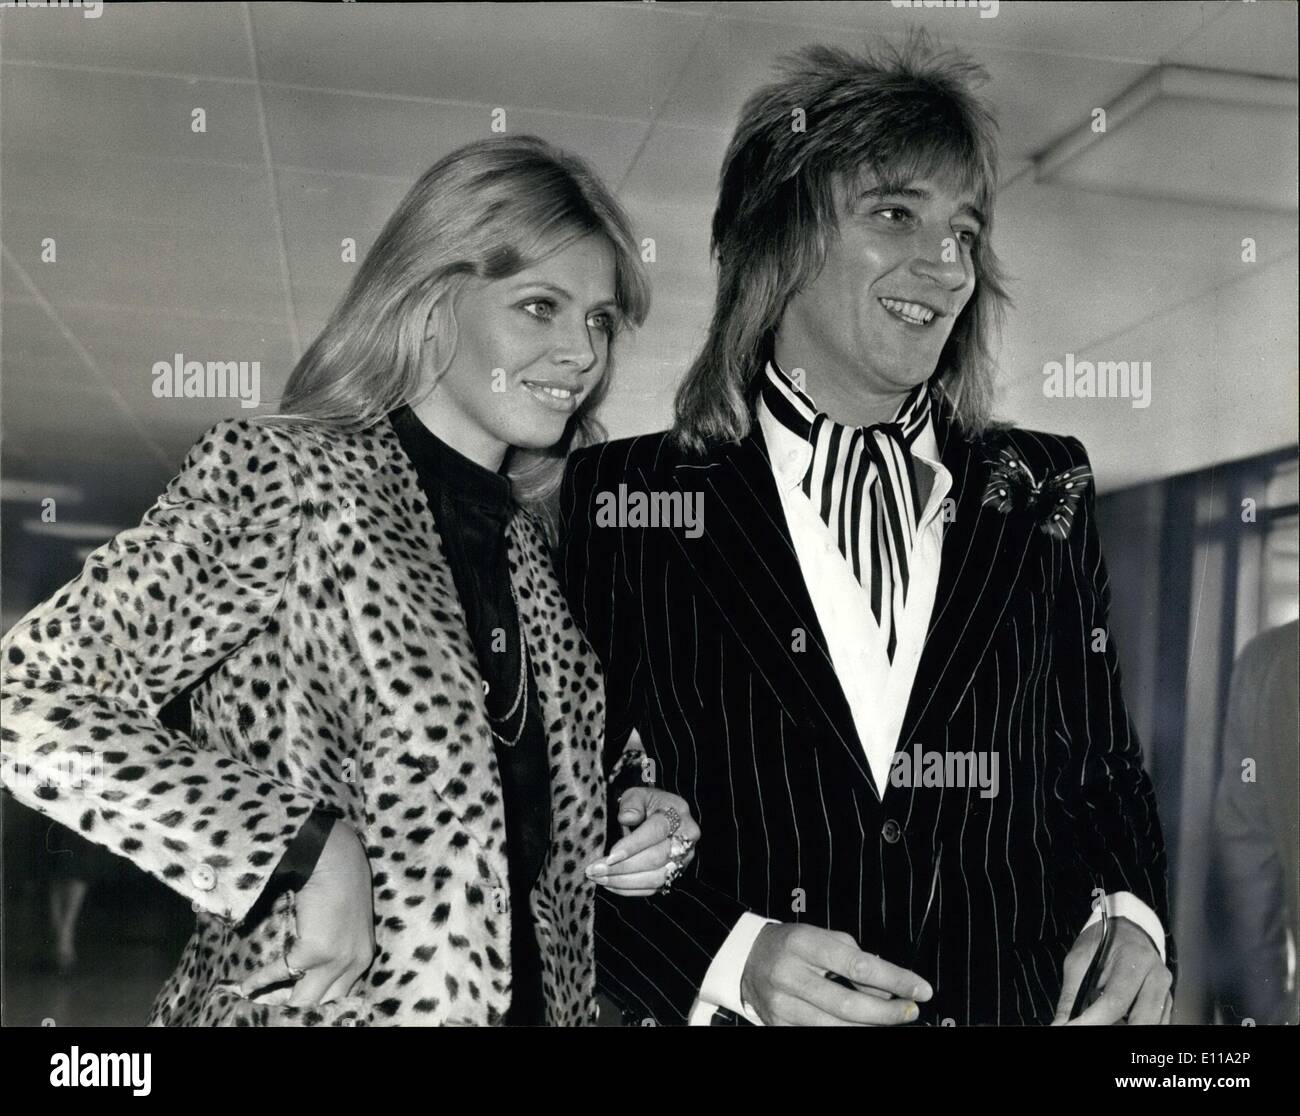 Jun. 06, 1976 - Rock Superstar Rod Stewart will not marry Britt Eckland: The romance between rock superstar Rod Stewart and Swedish actress Britt Ekland is unlikely to lead to marriage according to Rod, The couple have been living together in Los Angeles for more than a year but still have no plans to wed. Stewart said he has been anti-marriage all his life and said; ''I haven't changed in that respect''. Photo Shows: Rod Stewart and the girl he will not marry, Britt Ekland. Stock Photo